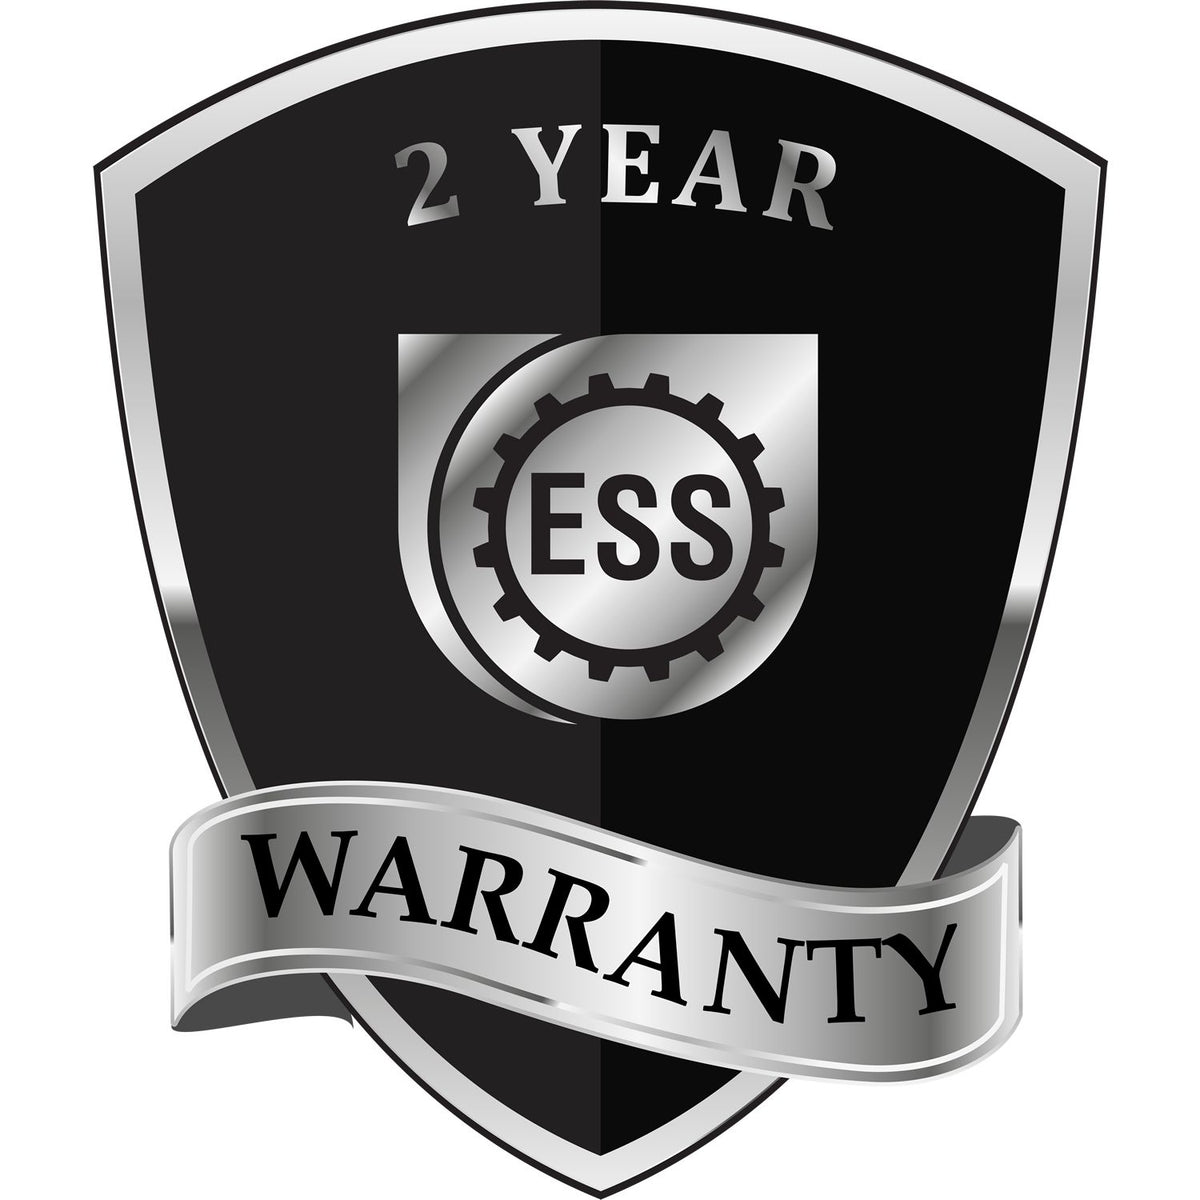 A black and silver badge or emblem showing warranty information for the Long Reach Georgia Geology Seal